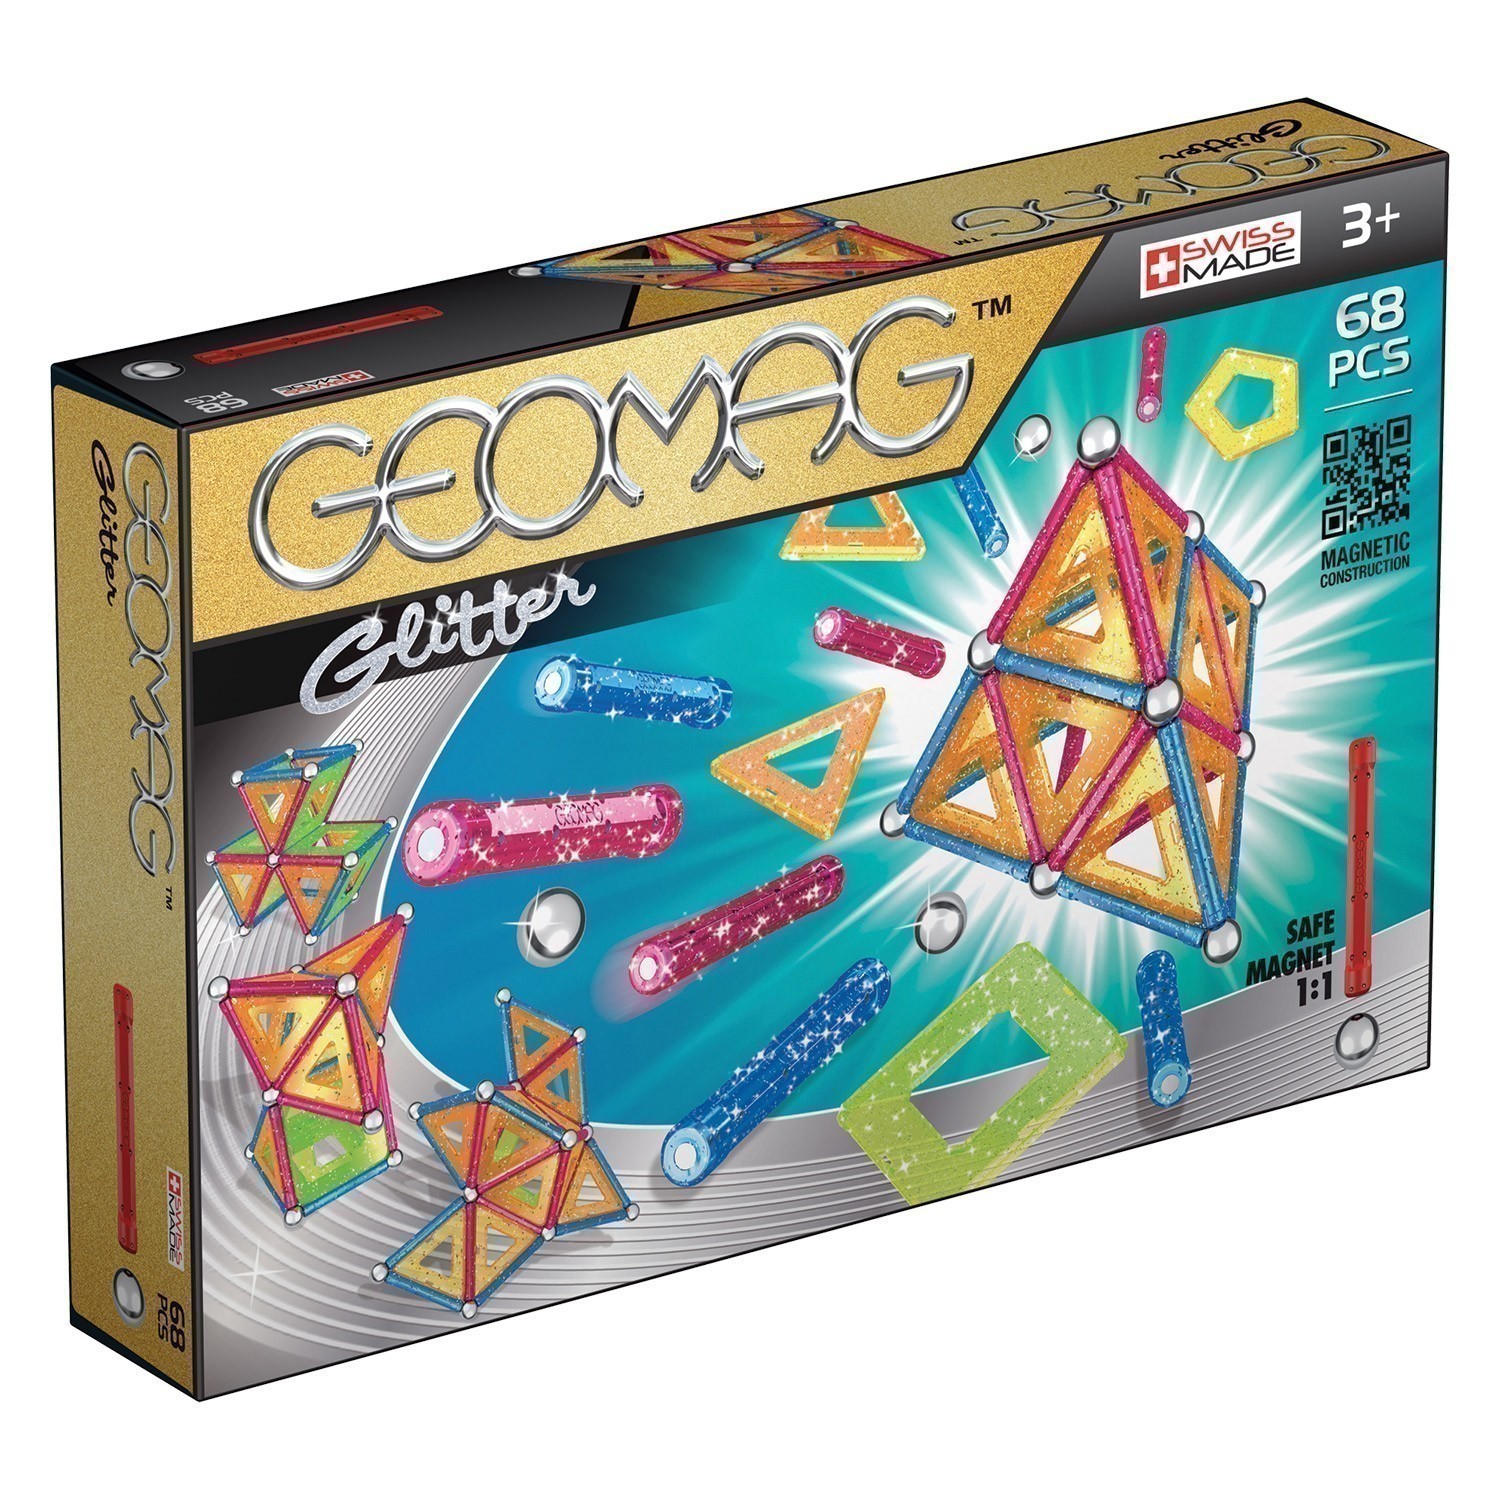 Geomag - Glitter - 68 Pieces